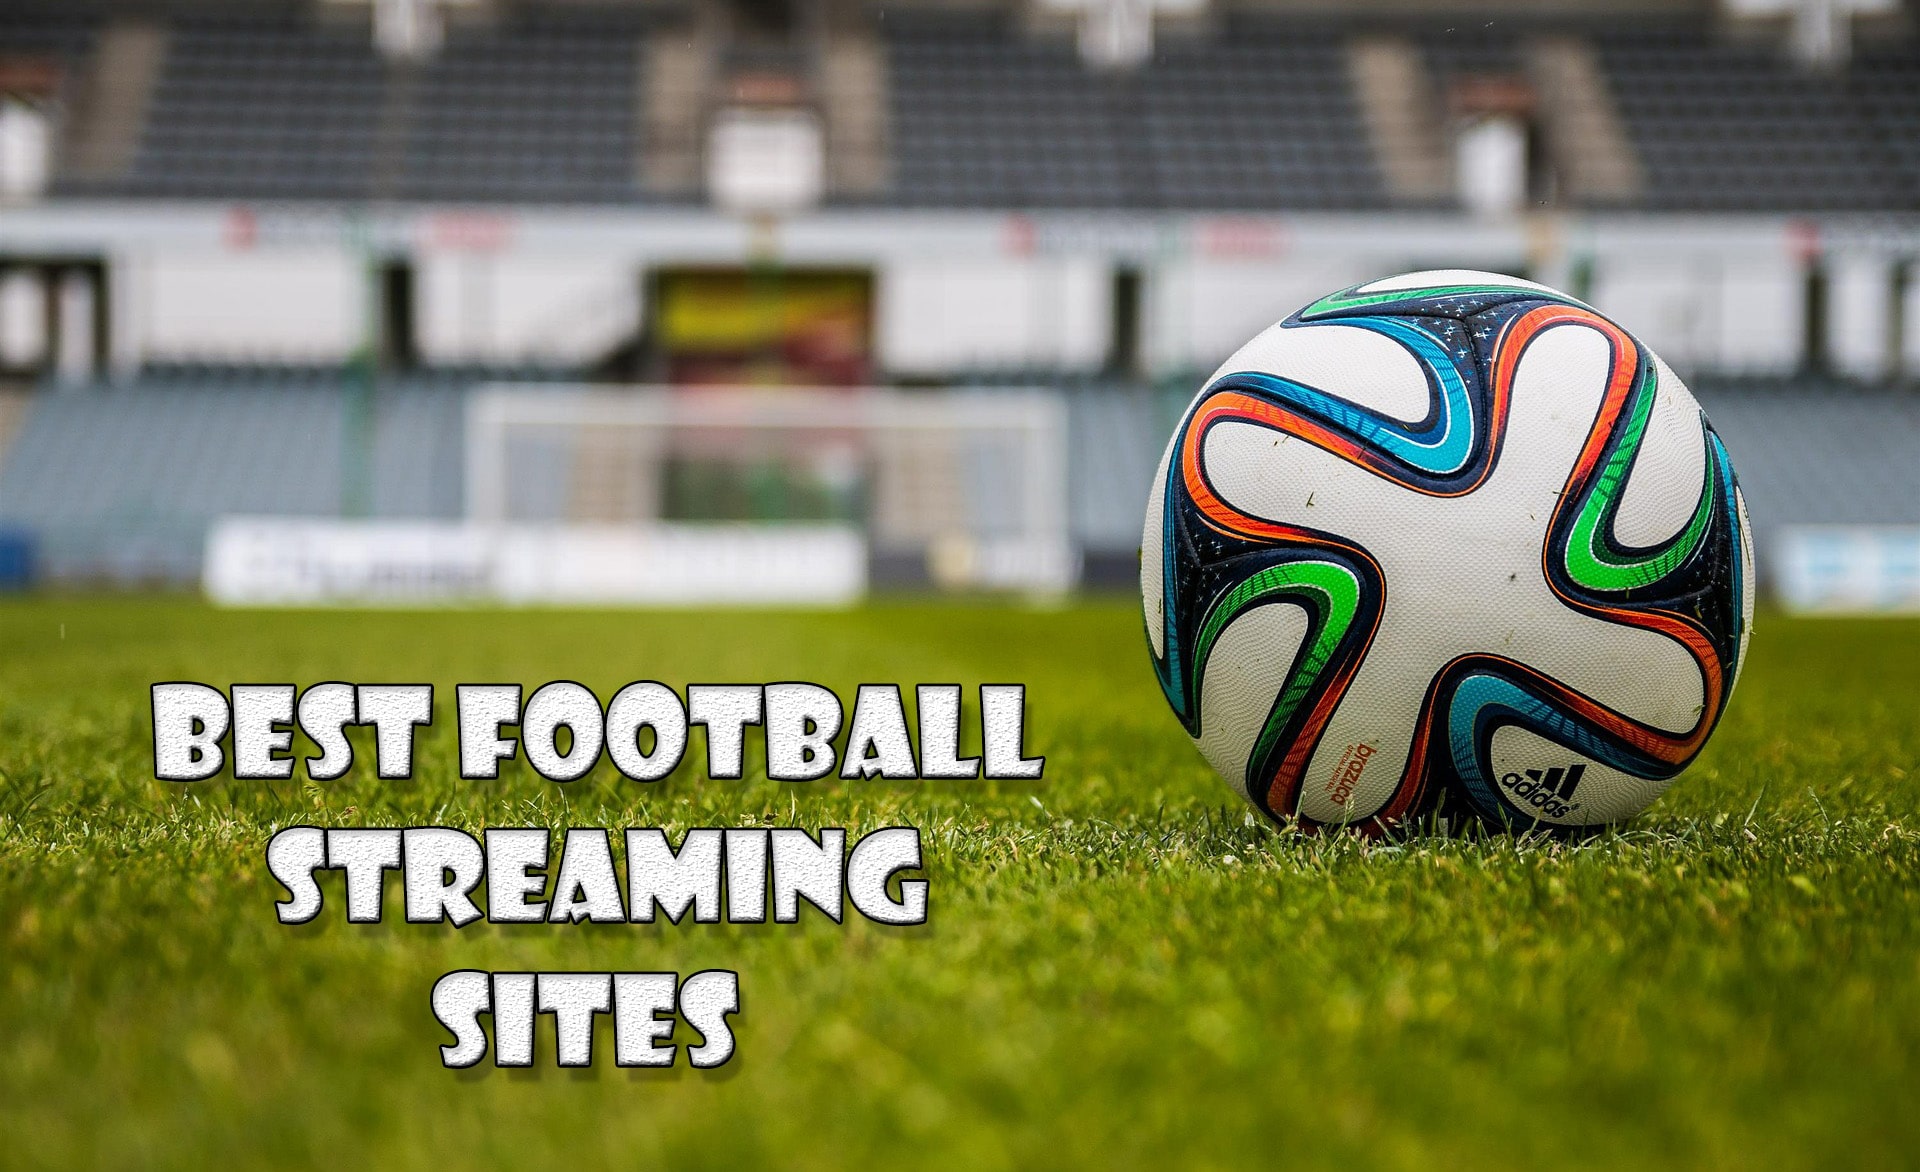 11 Best Football Streaming Sites To Stream Live Football - Trick Xpert